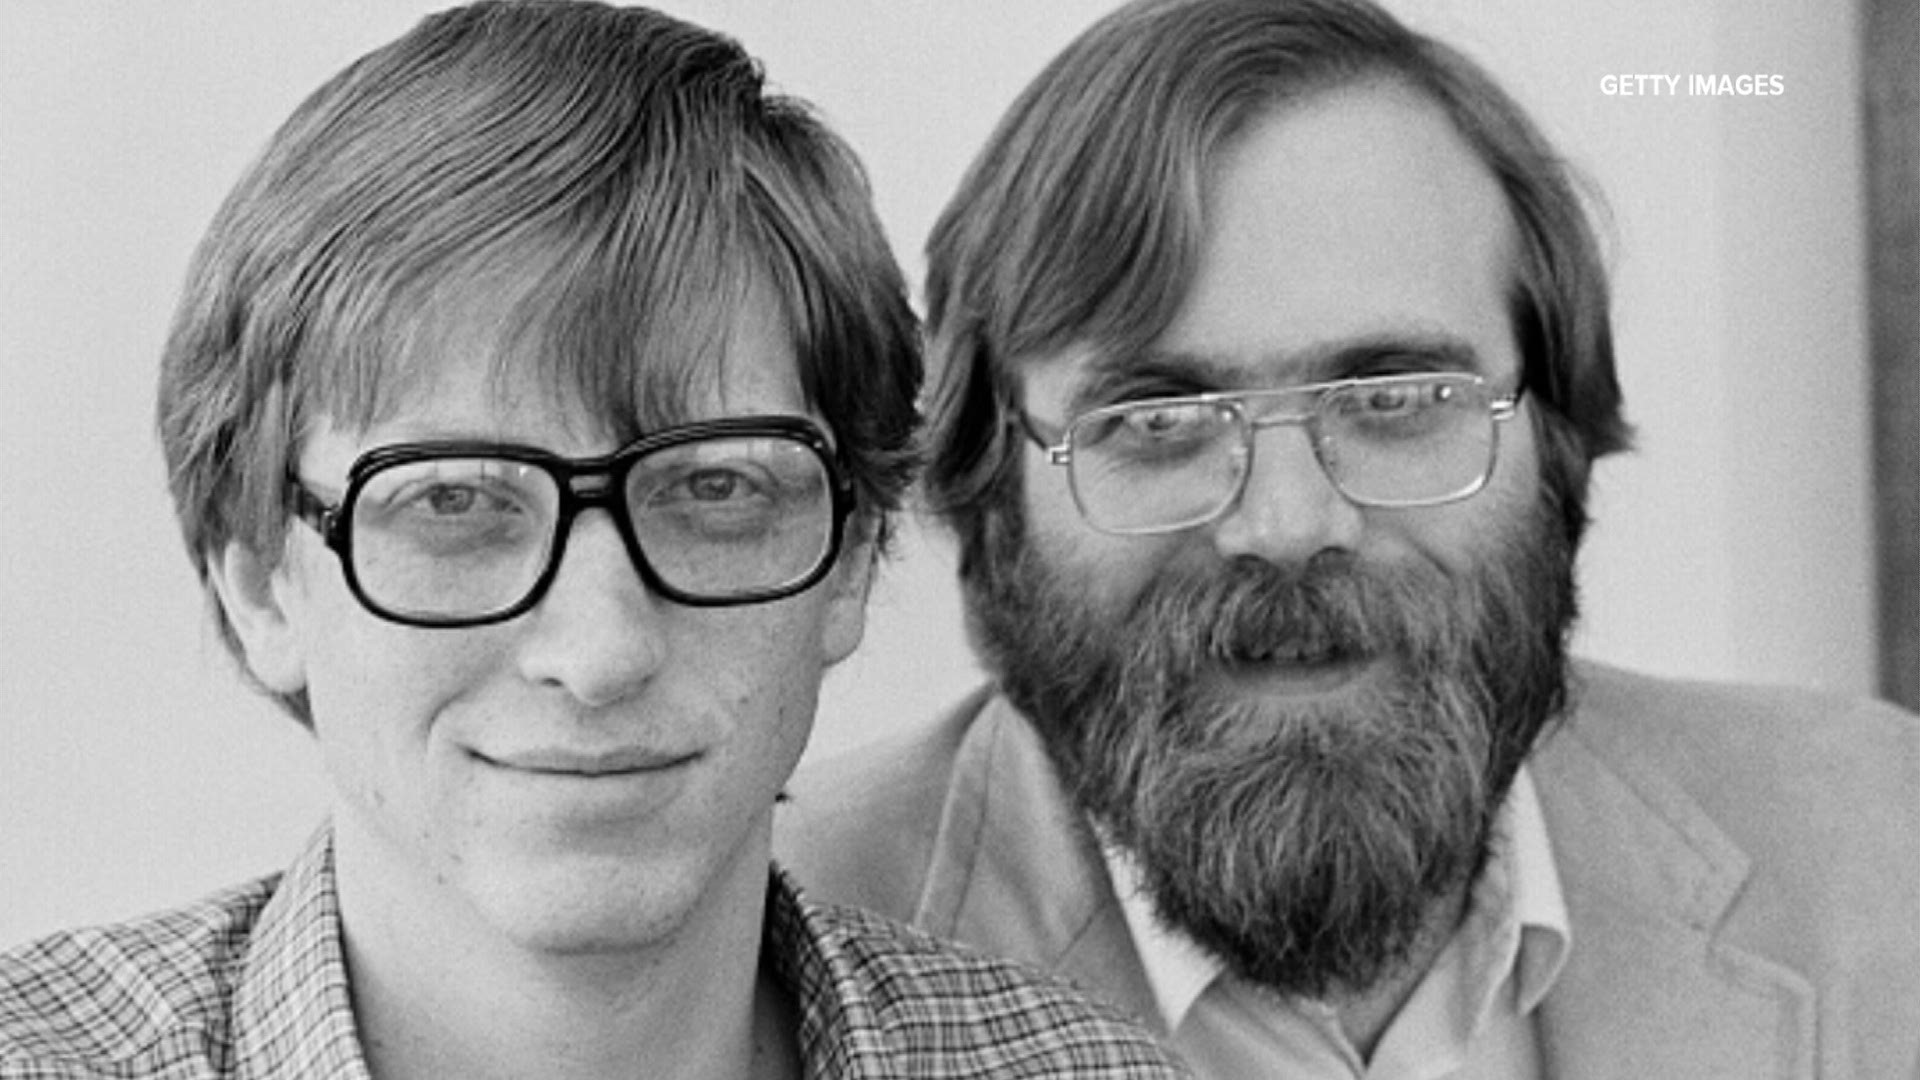 Microsoft co-founder and Seahawks owner Paul Allen has died from complications associated with non-Hodgkin's lymphoma. He was 65.